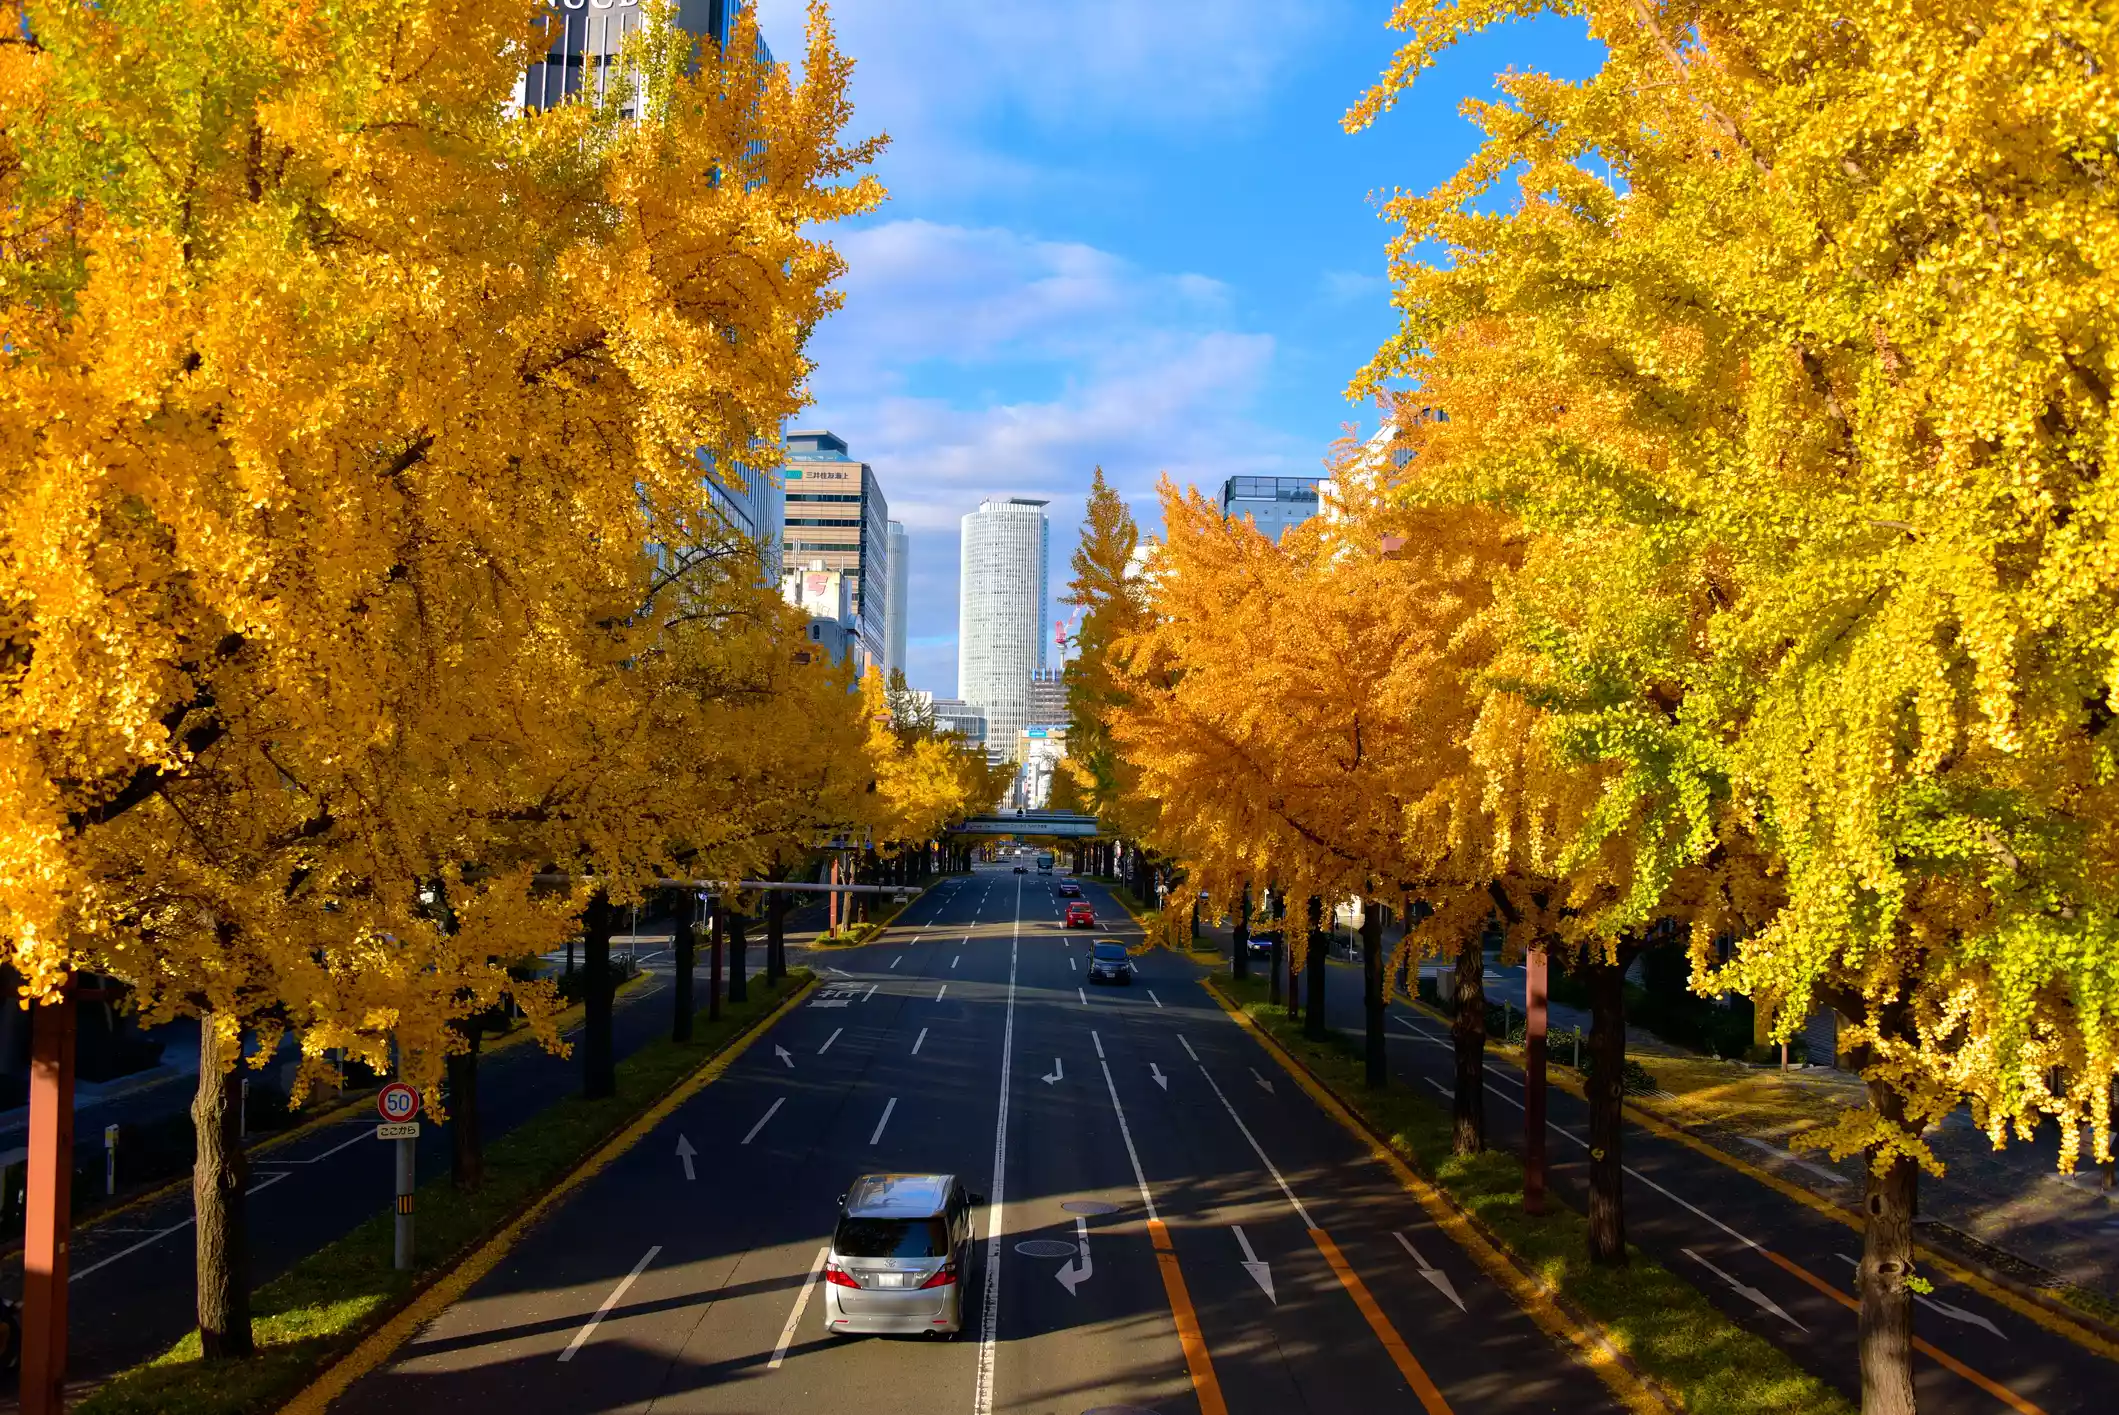 Gingko Biloba trees lined up against a highway in an urban setting.